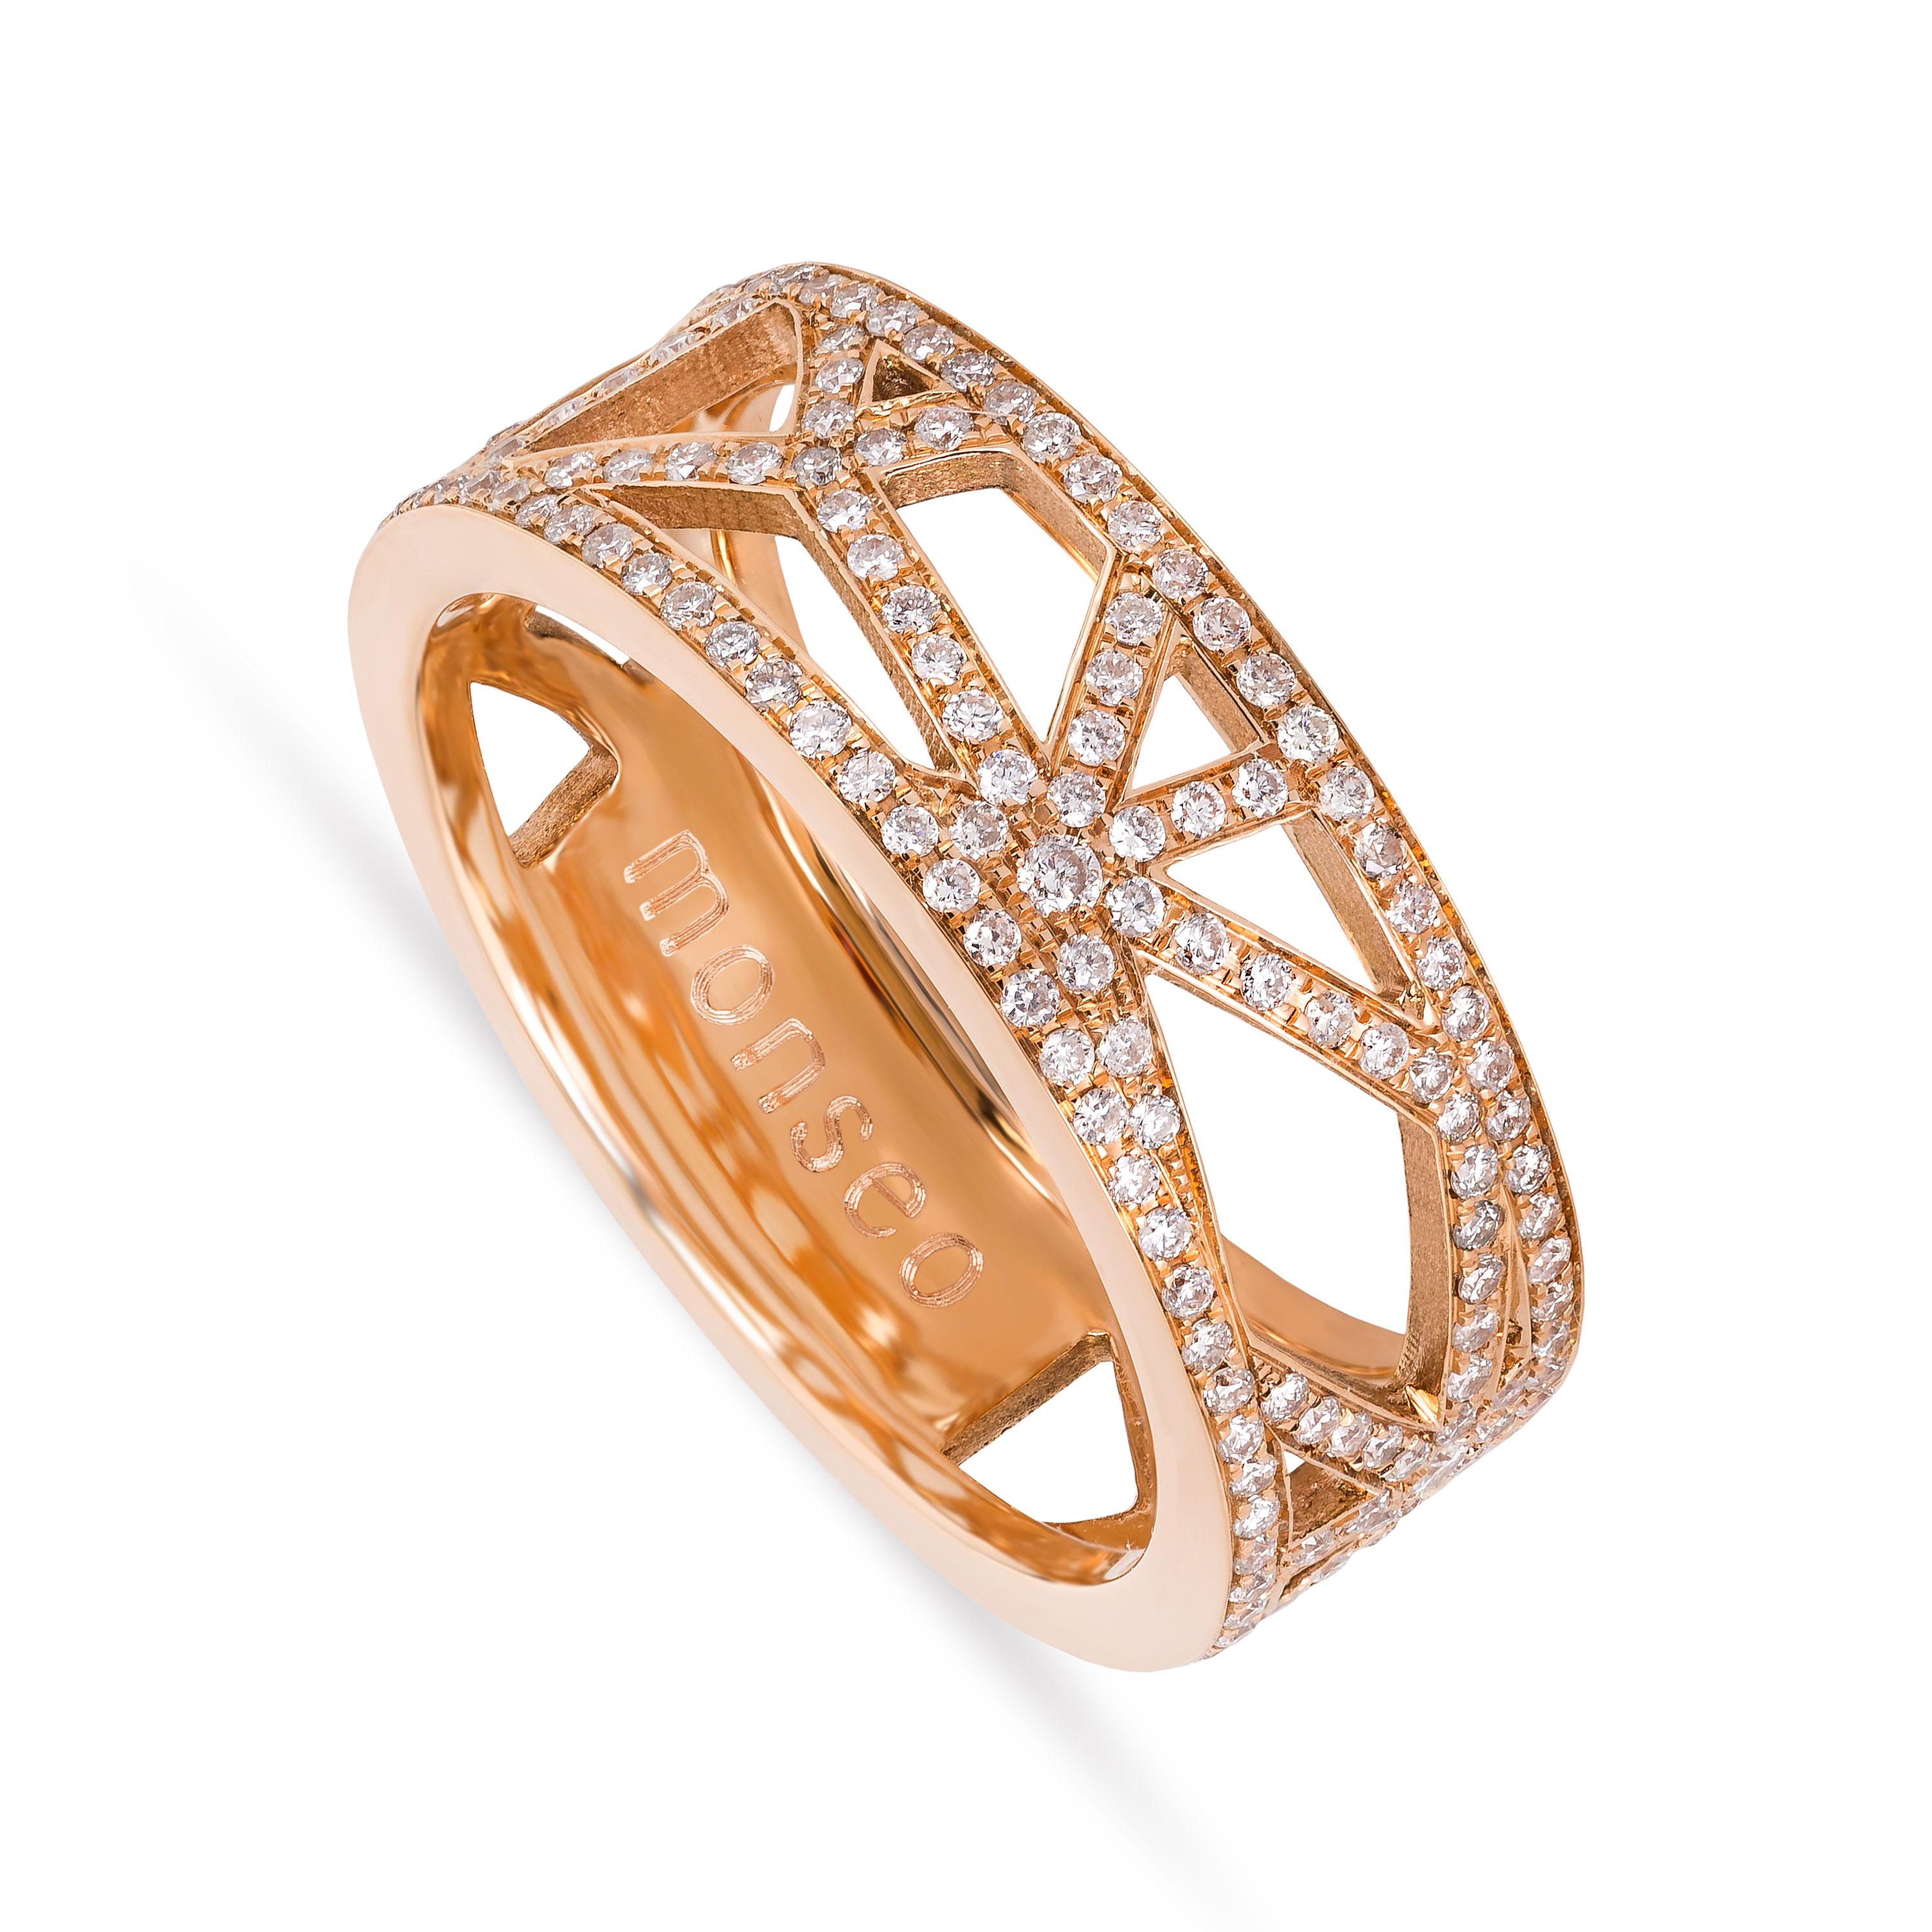 19.2K rose gold ring with 198 brilliant cut diamonds with 0.57 ct.

This piece is part of 'Portuguese Story' collection by Monseo and they were inspired by Portuguese cultural heritage. Several pieces of jewellery were designed by architectural